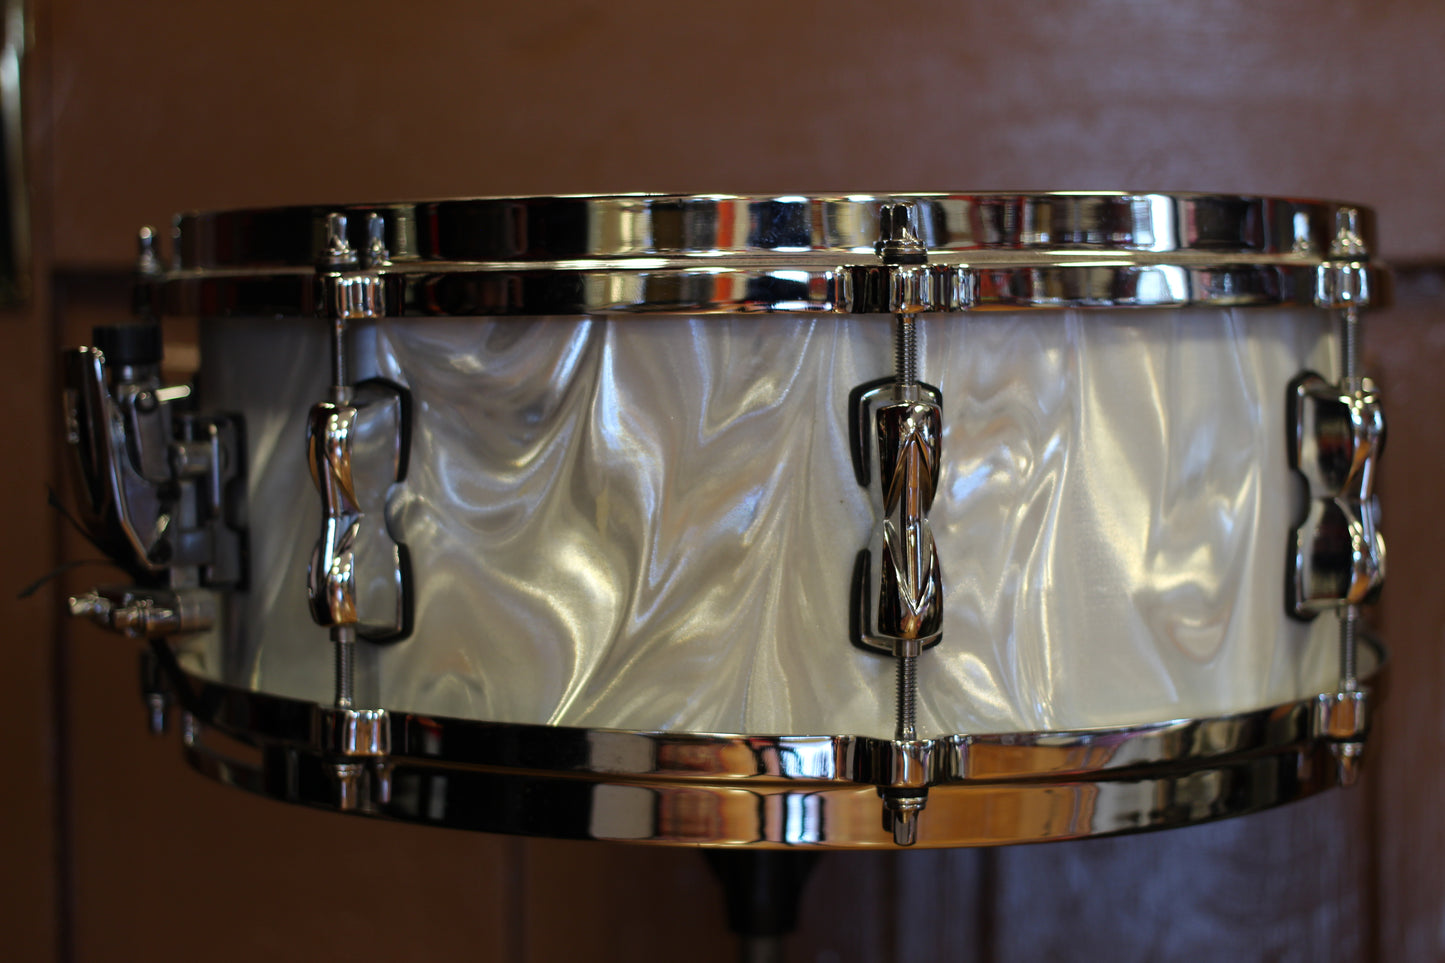 Used Tama Superstar Hyperdrive 5"x14" Snare Drum in White Satin Flame